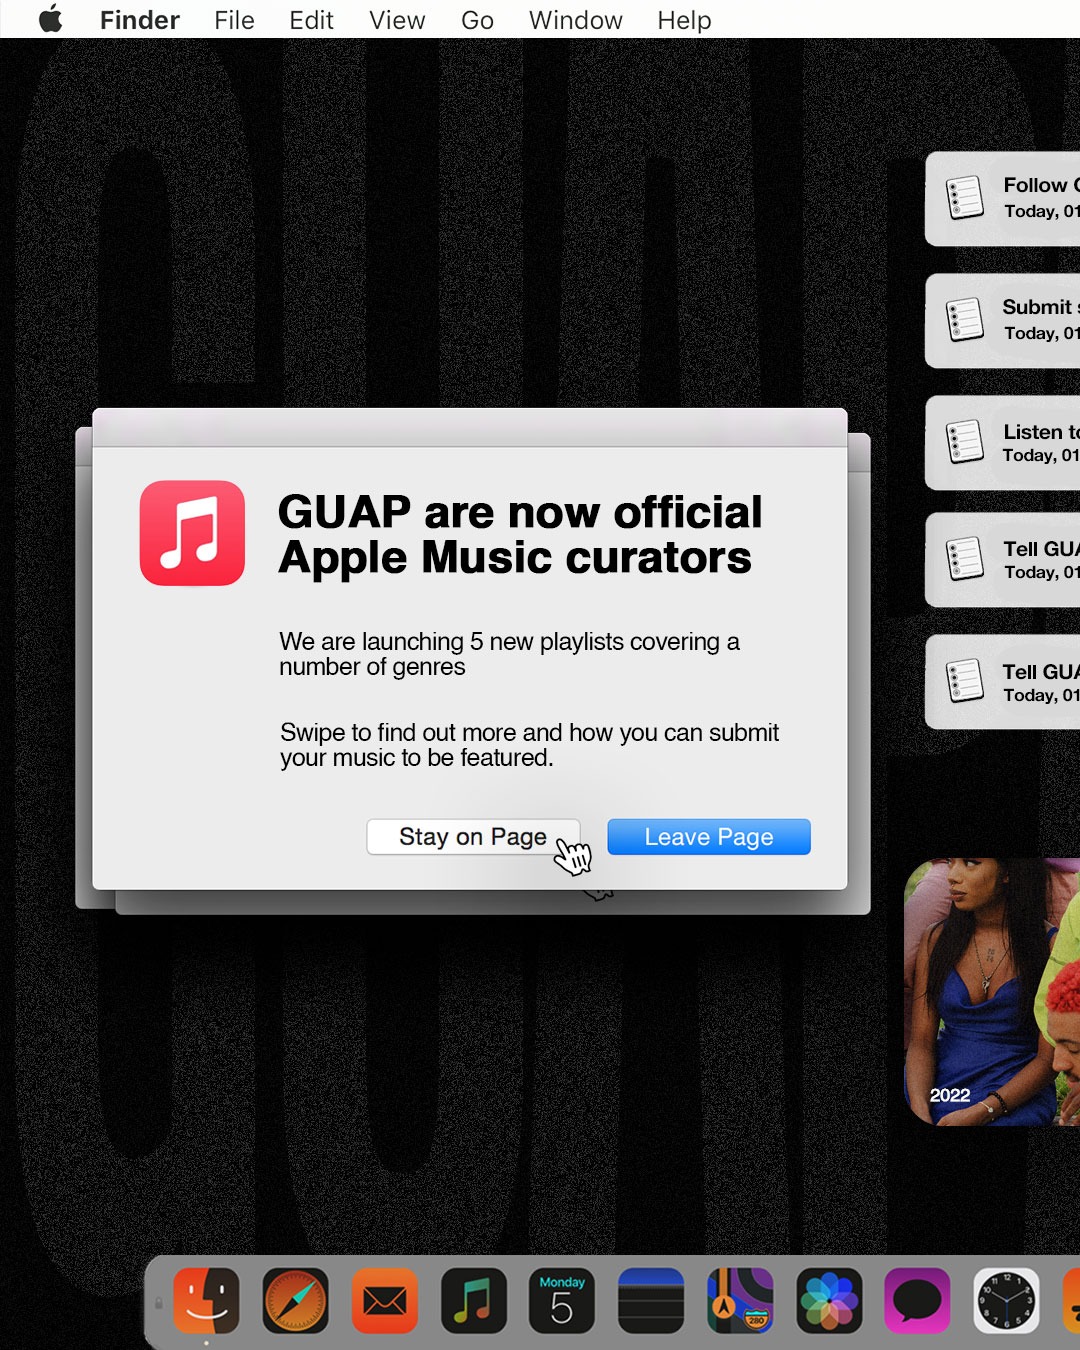 GUAP Are Now Official Apple Music Curators